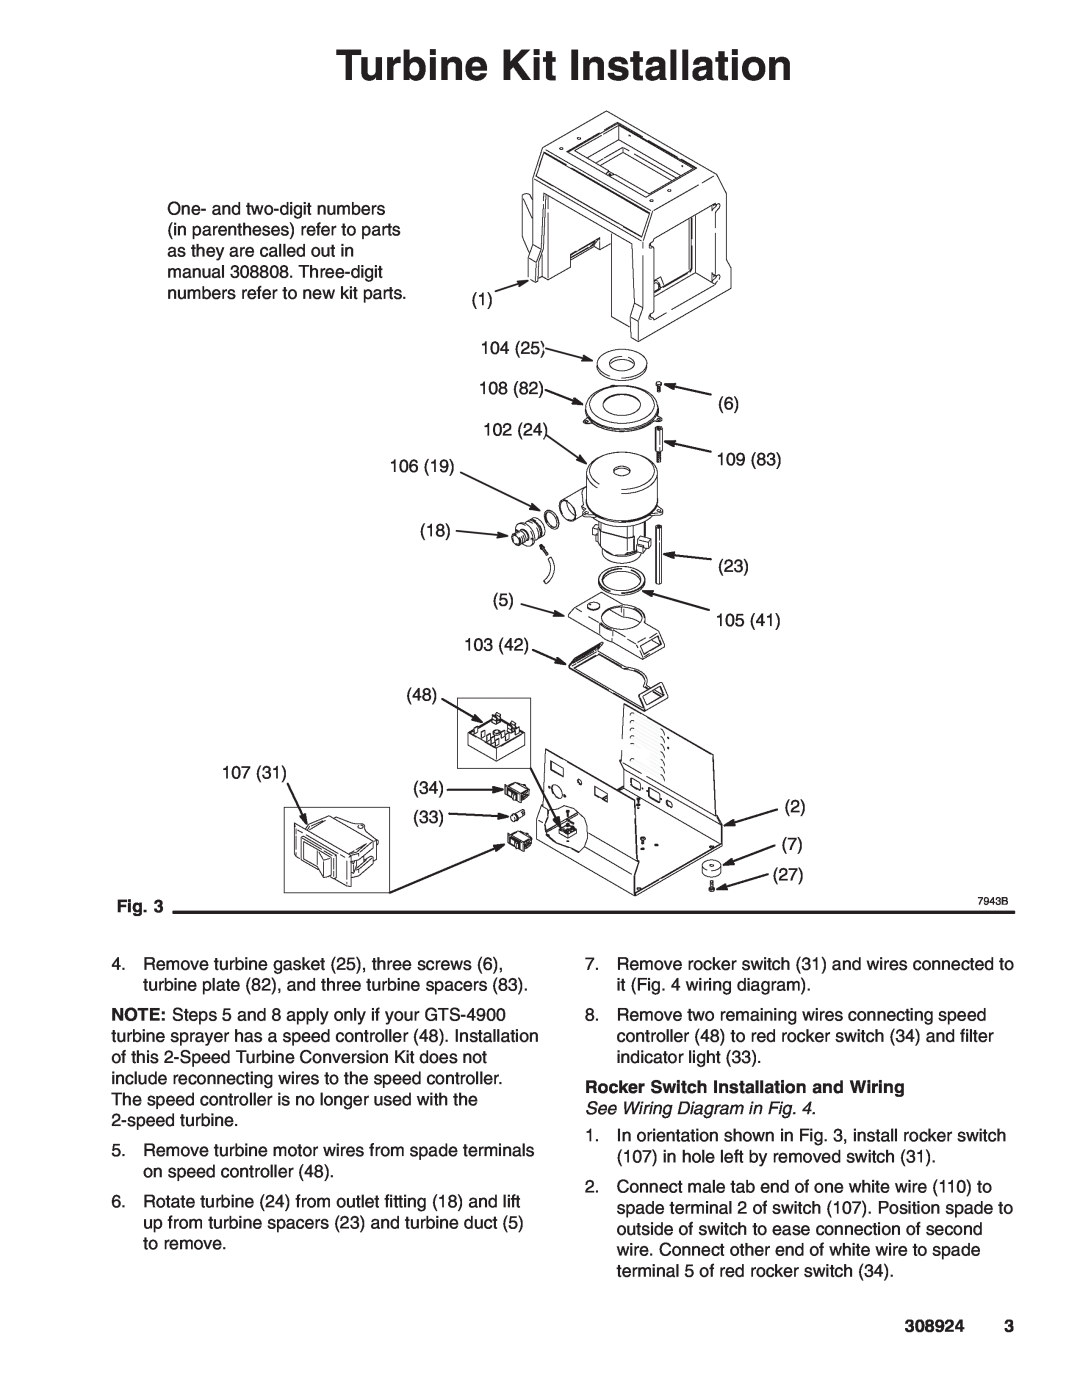 Graco 241123, Series A manual Turbine Kit Installation, Rocker Switch Installation and Wiring, See Wiring Diagram in Fig 